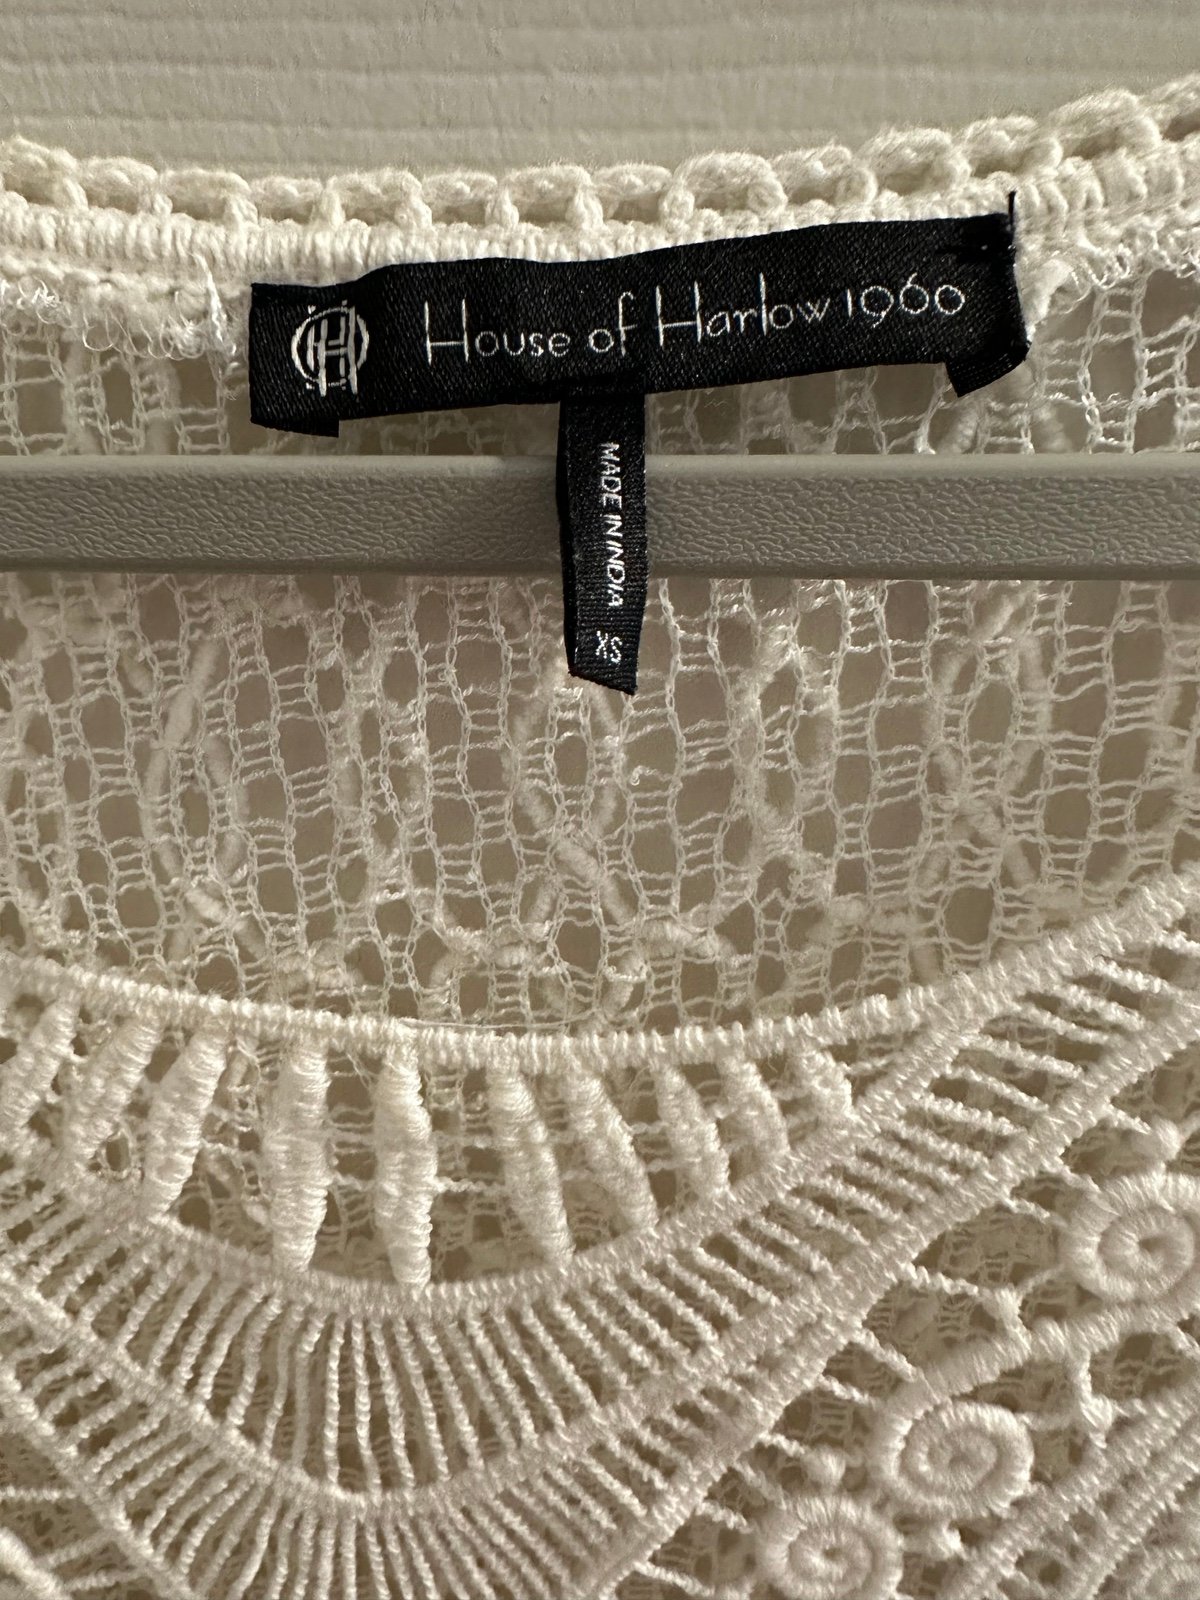 Custom House of harlow 1960 knit top FUYqJLpTj Everyday Low Prices